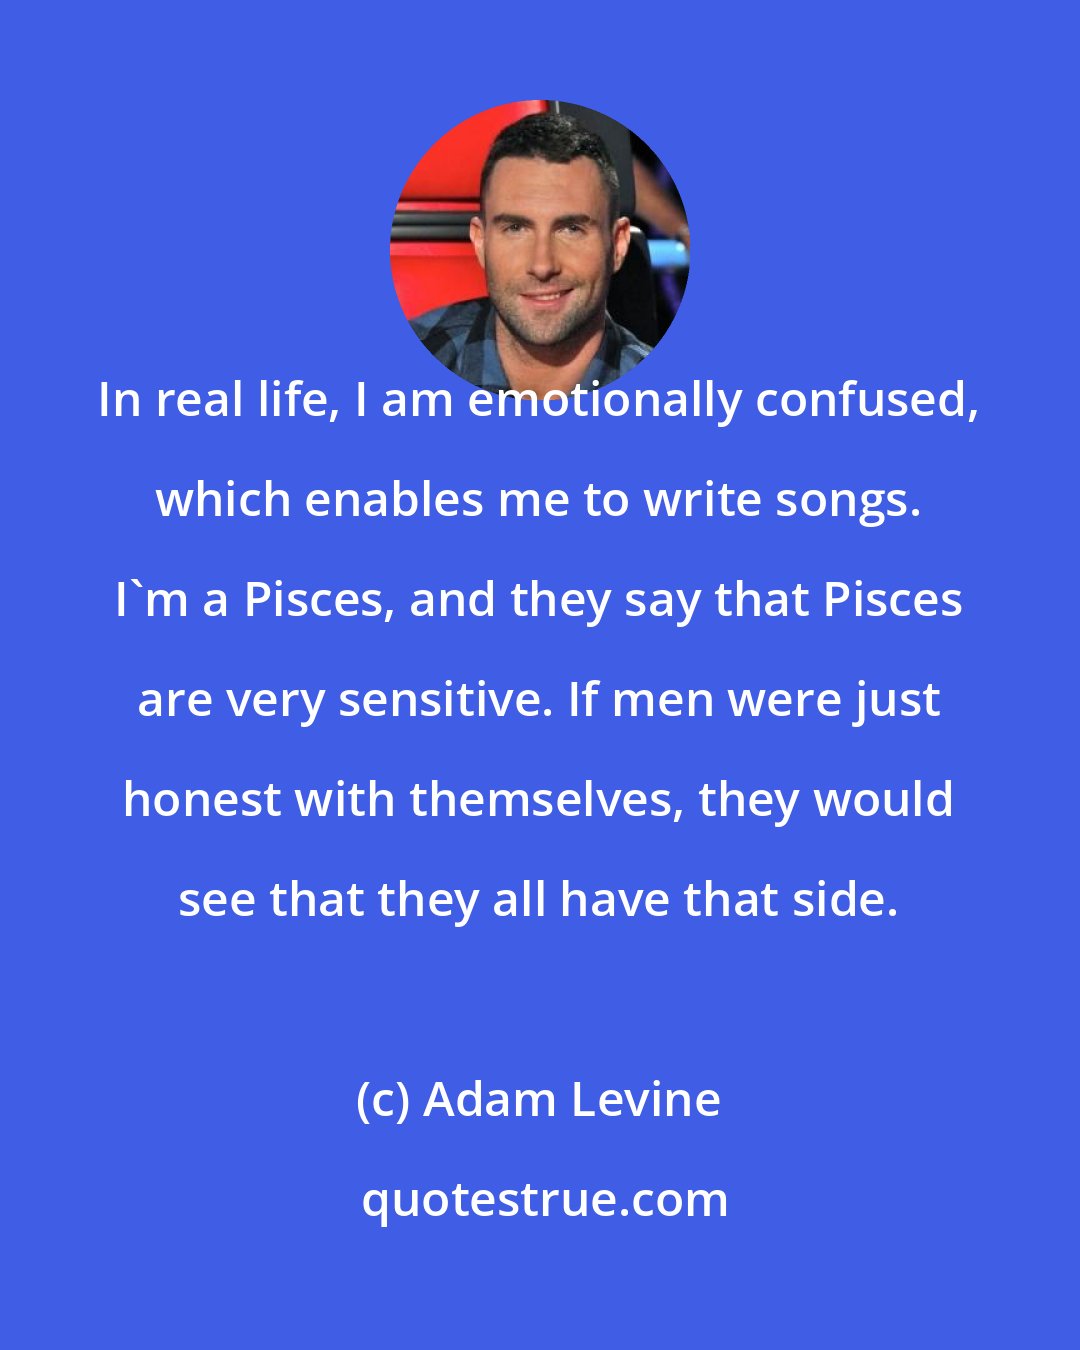 Adam Levine: In real life, I am emotionally confused, which enables me to write songs. I'm a Pisces, and they say that Pisces are very sensitive. If men were just honest with themselves, they would see that they all have that side.